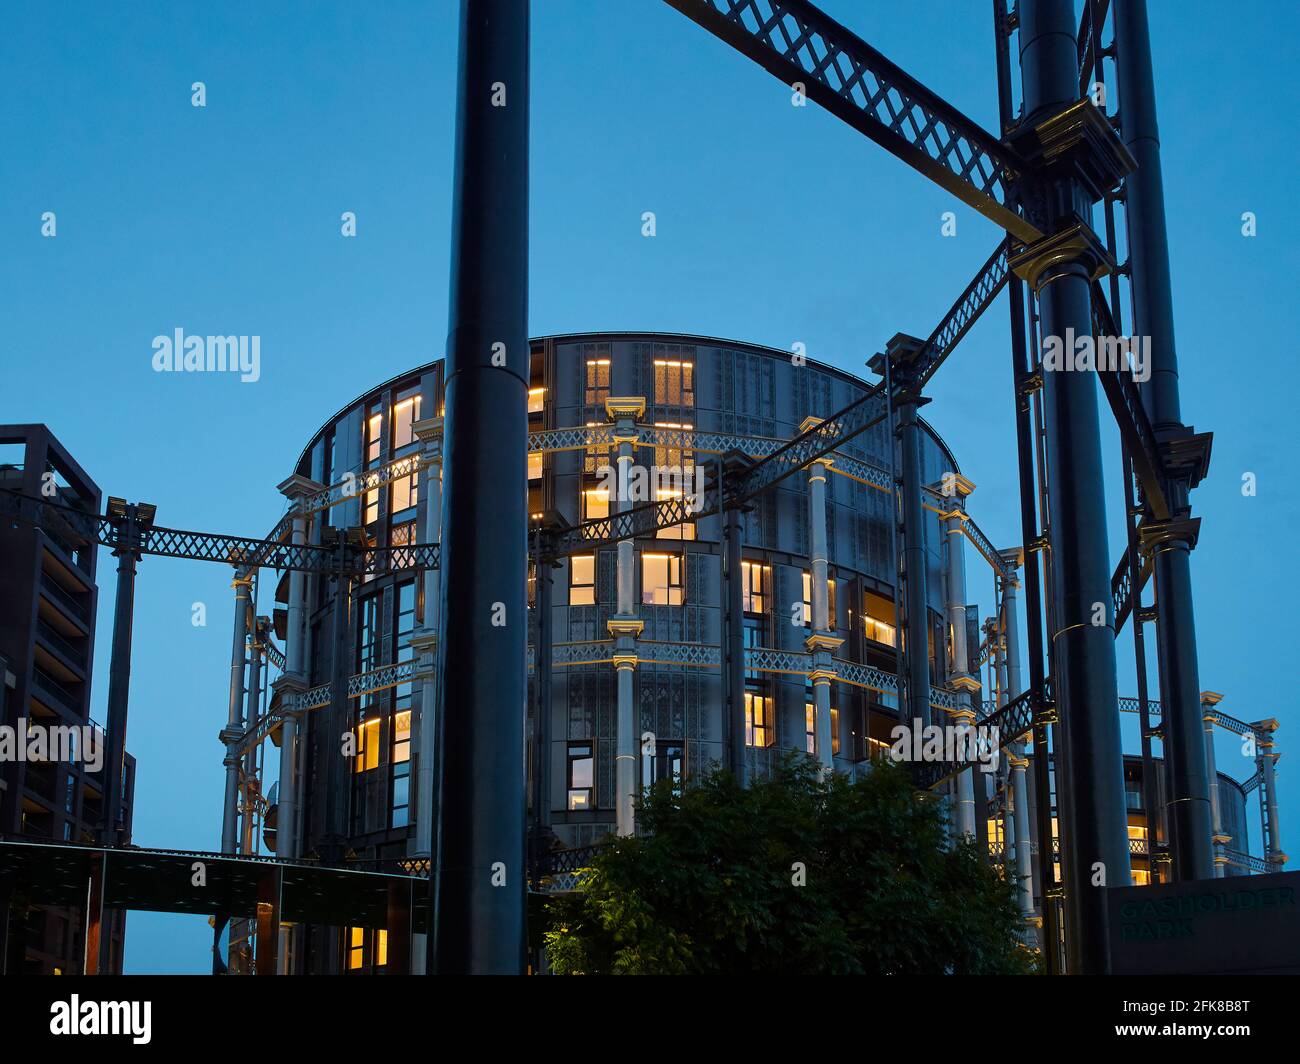 A group of gasometers, now flats following redevelopment as part of an urban renewal project. Warm light comes from the windows behind the ironwork. Stock Photo